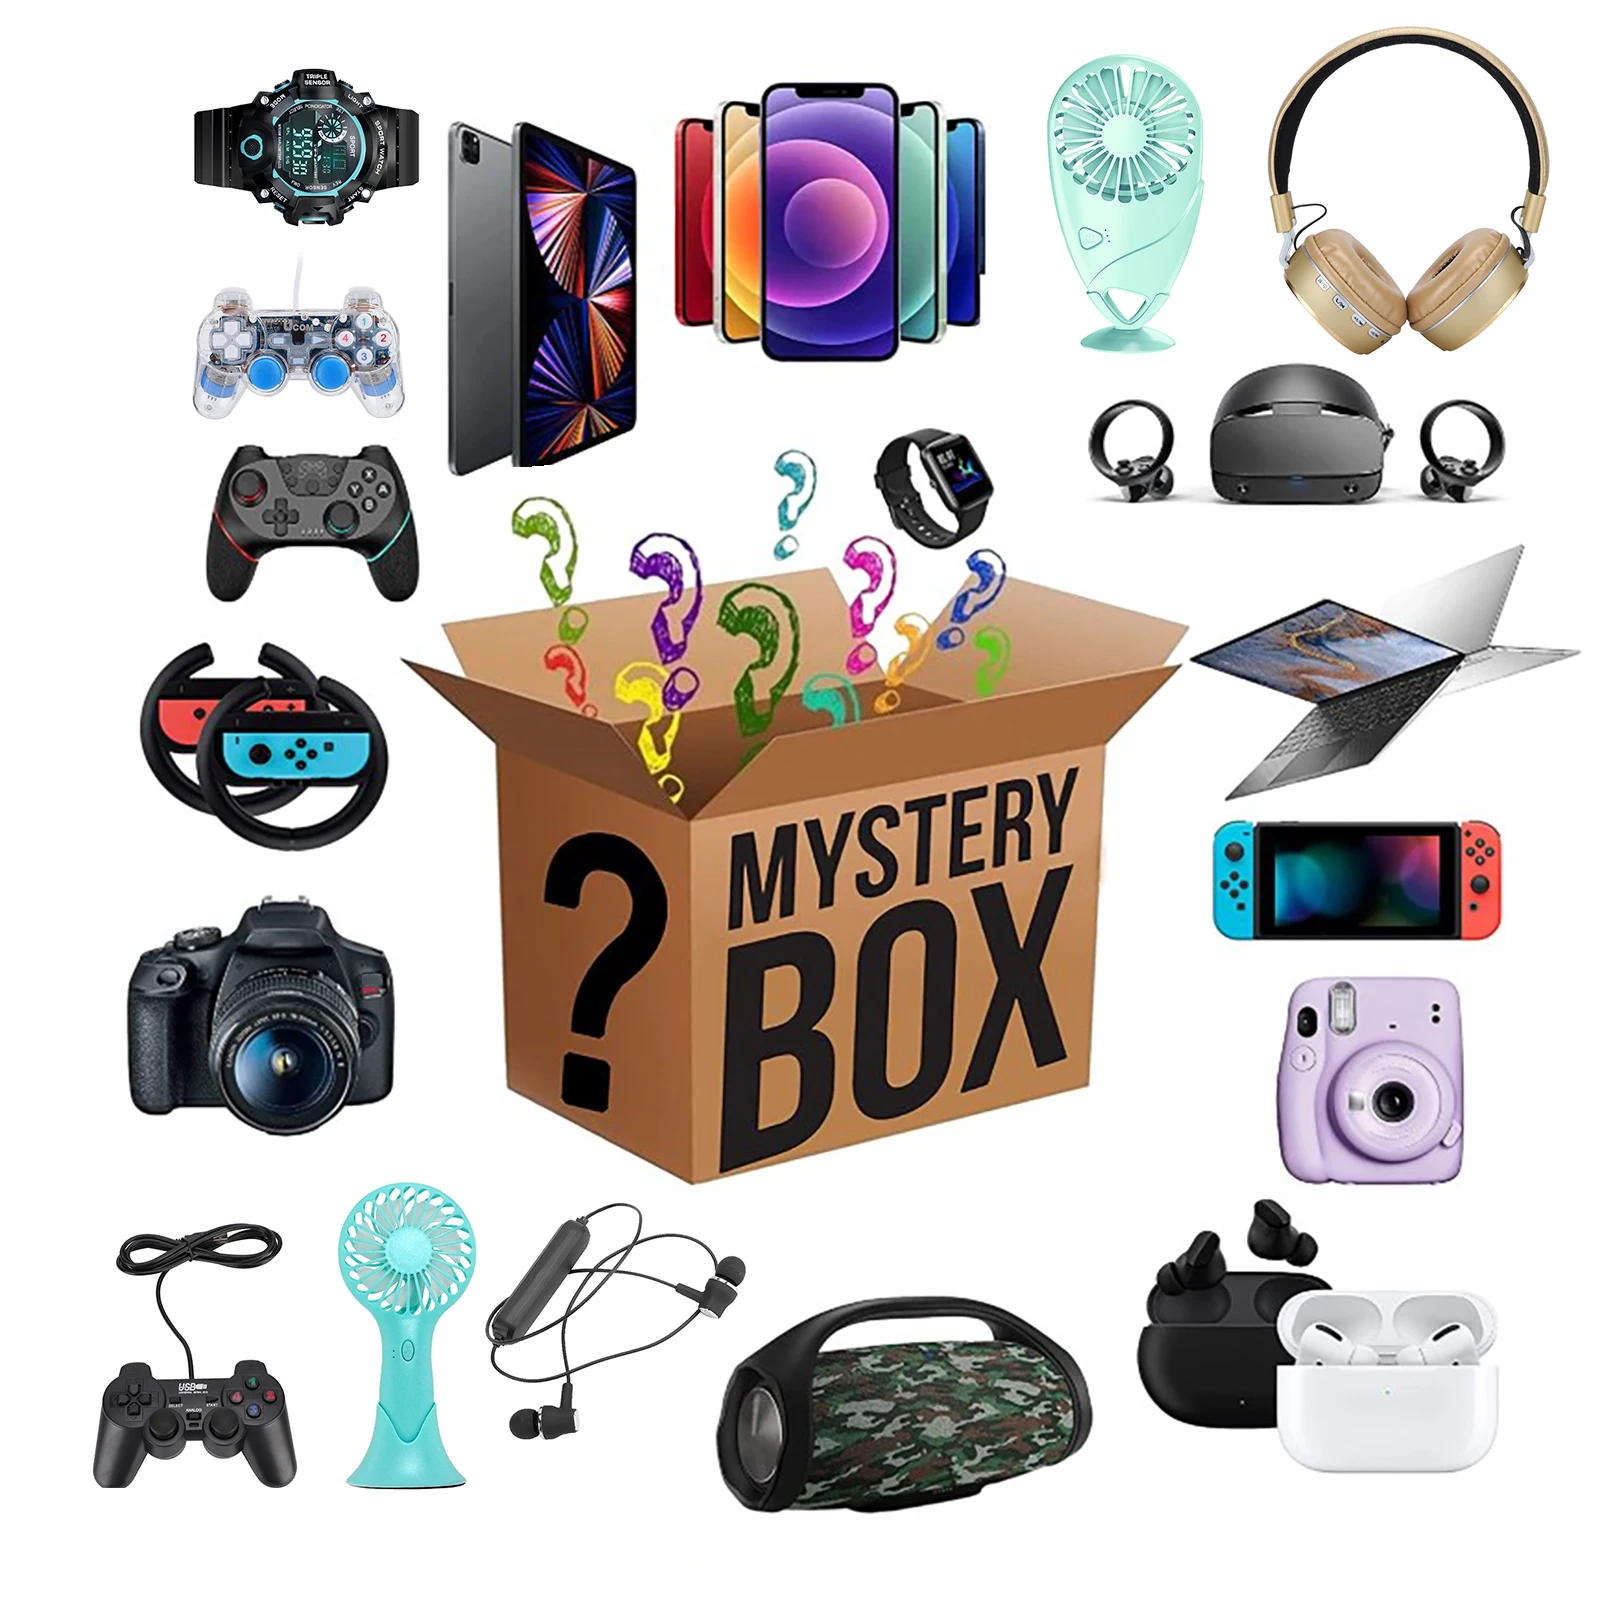 Smart Watches There is A Chance to Open: Such As Drones Lucky Box Contains Hundreds of Products and Unexpected Gifts Mystery Box Surprise Box Mystery Box Electronics Random Gamepads Ect